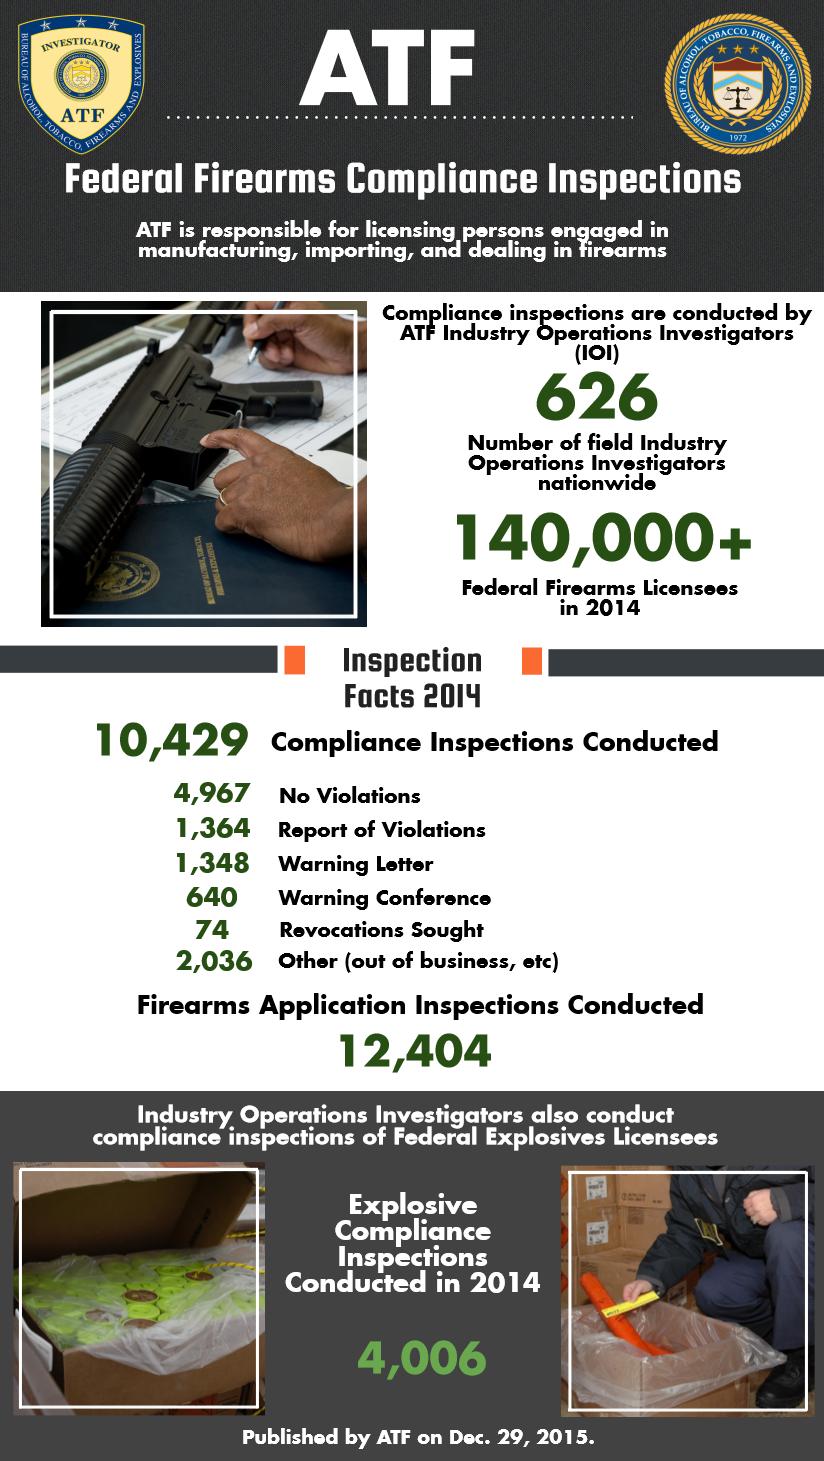  ATF is responsible for licensing persons engaged in manufacturing, importing, and dealing in firearms. Compliance inspections are conducted by ATF Industry Operations Investigators. 